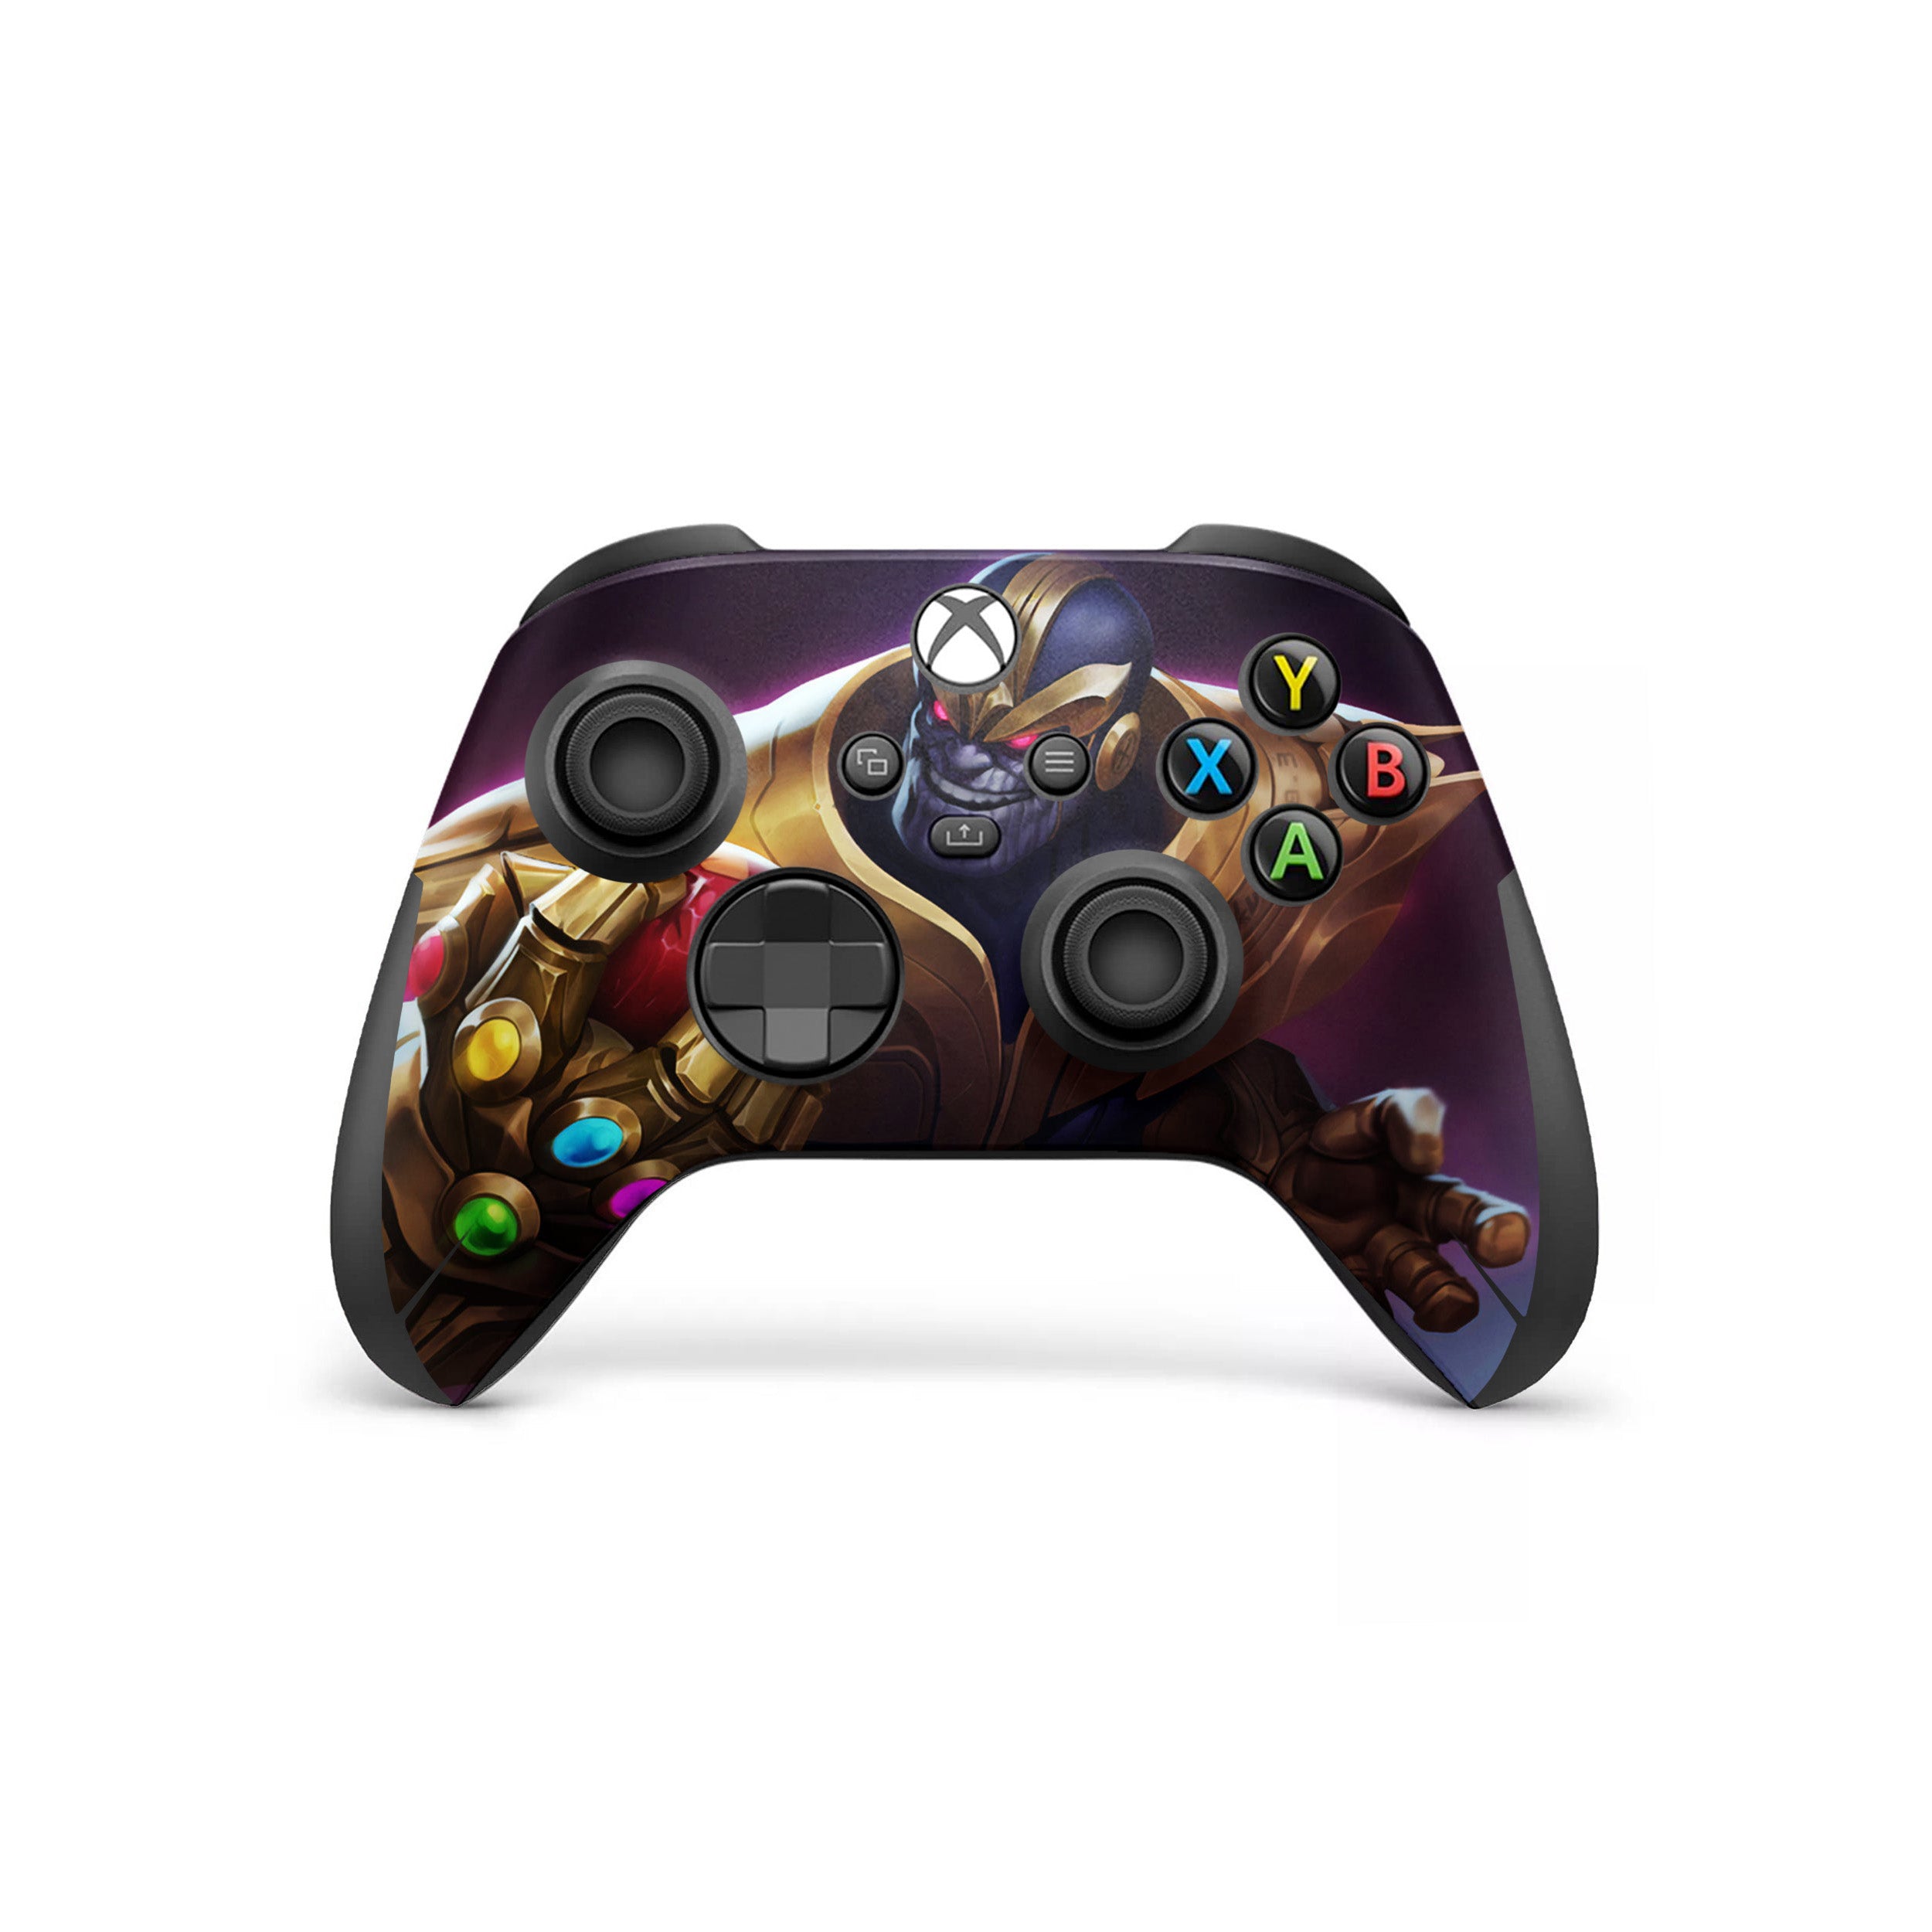 A video game skin featuring a Marvel Comics Thanos design for the Xbox Wireless Controller.